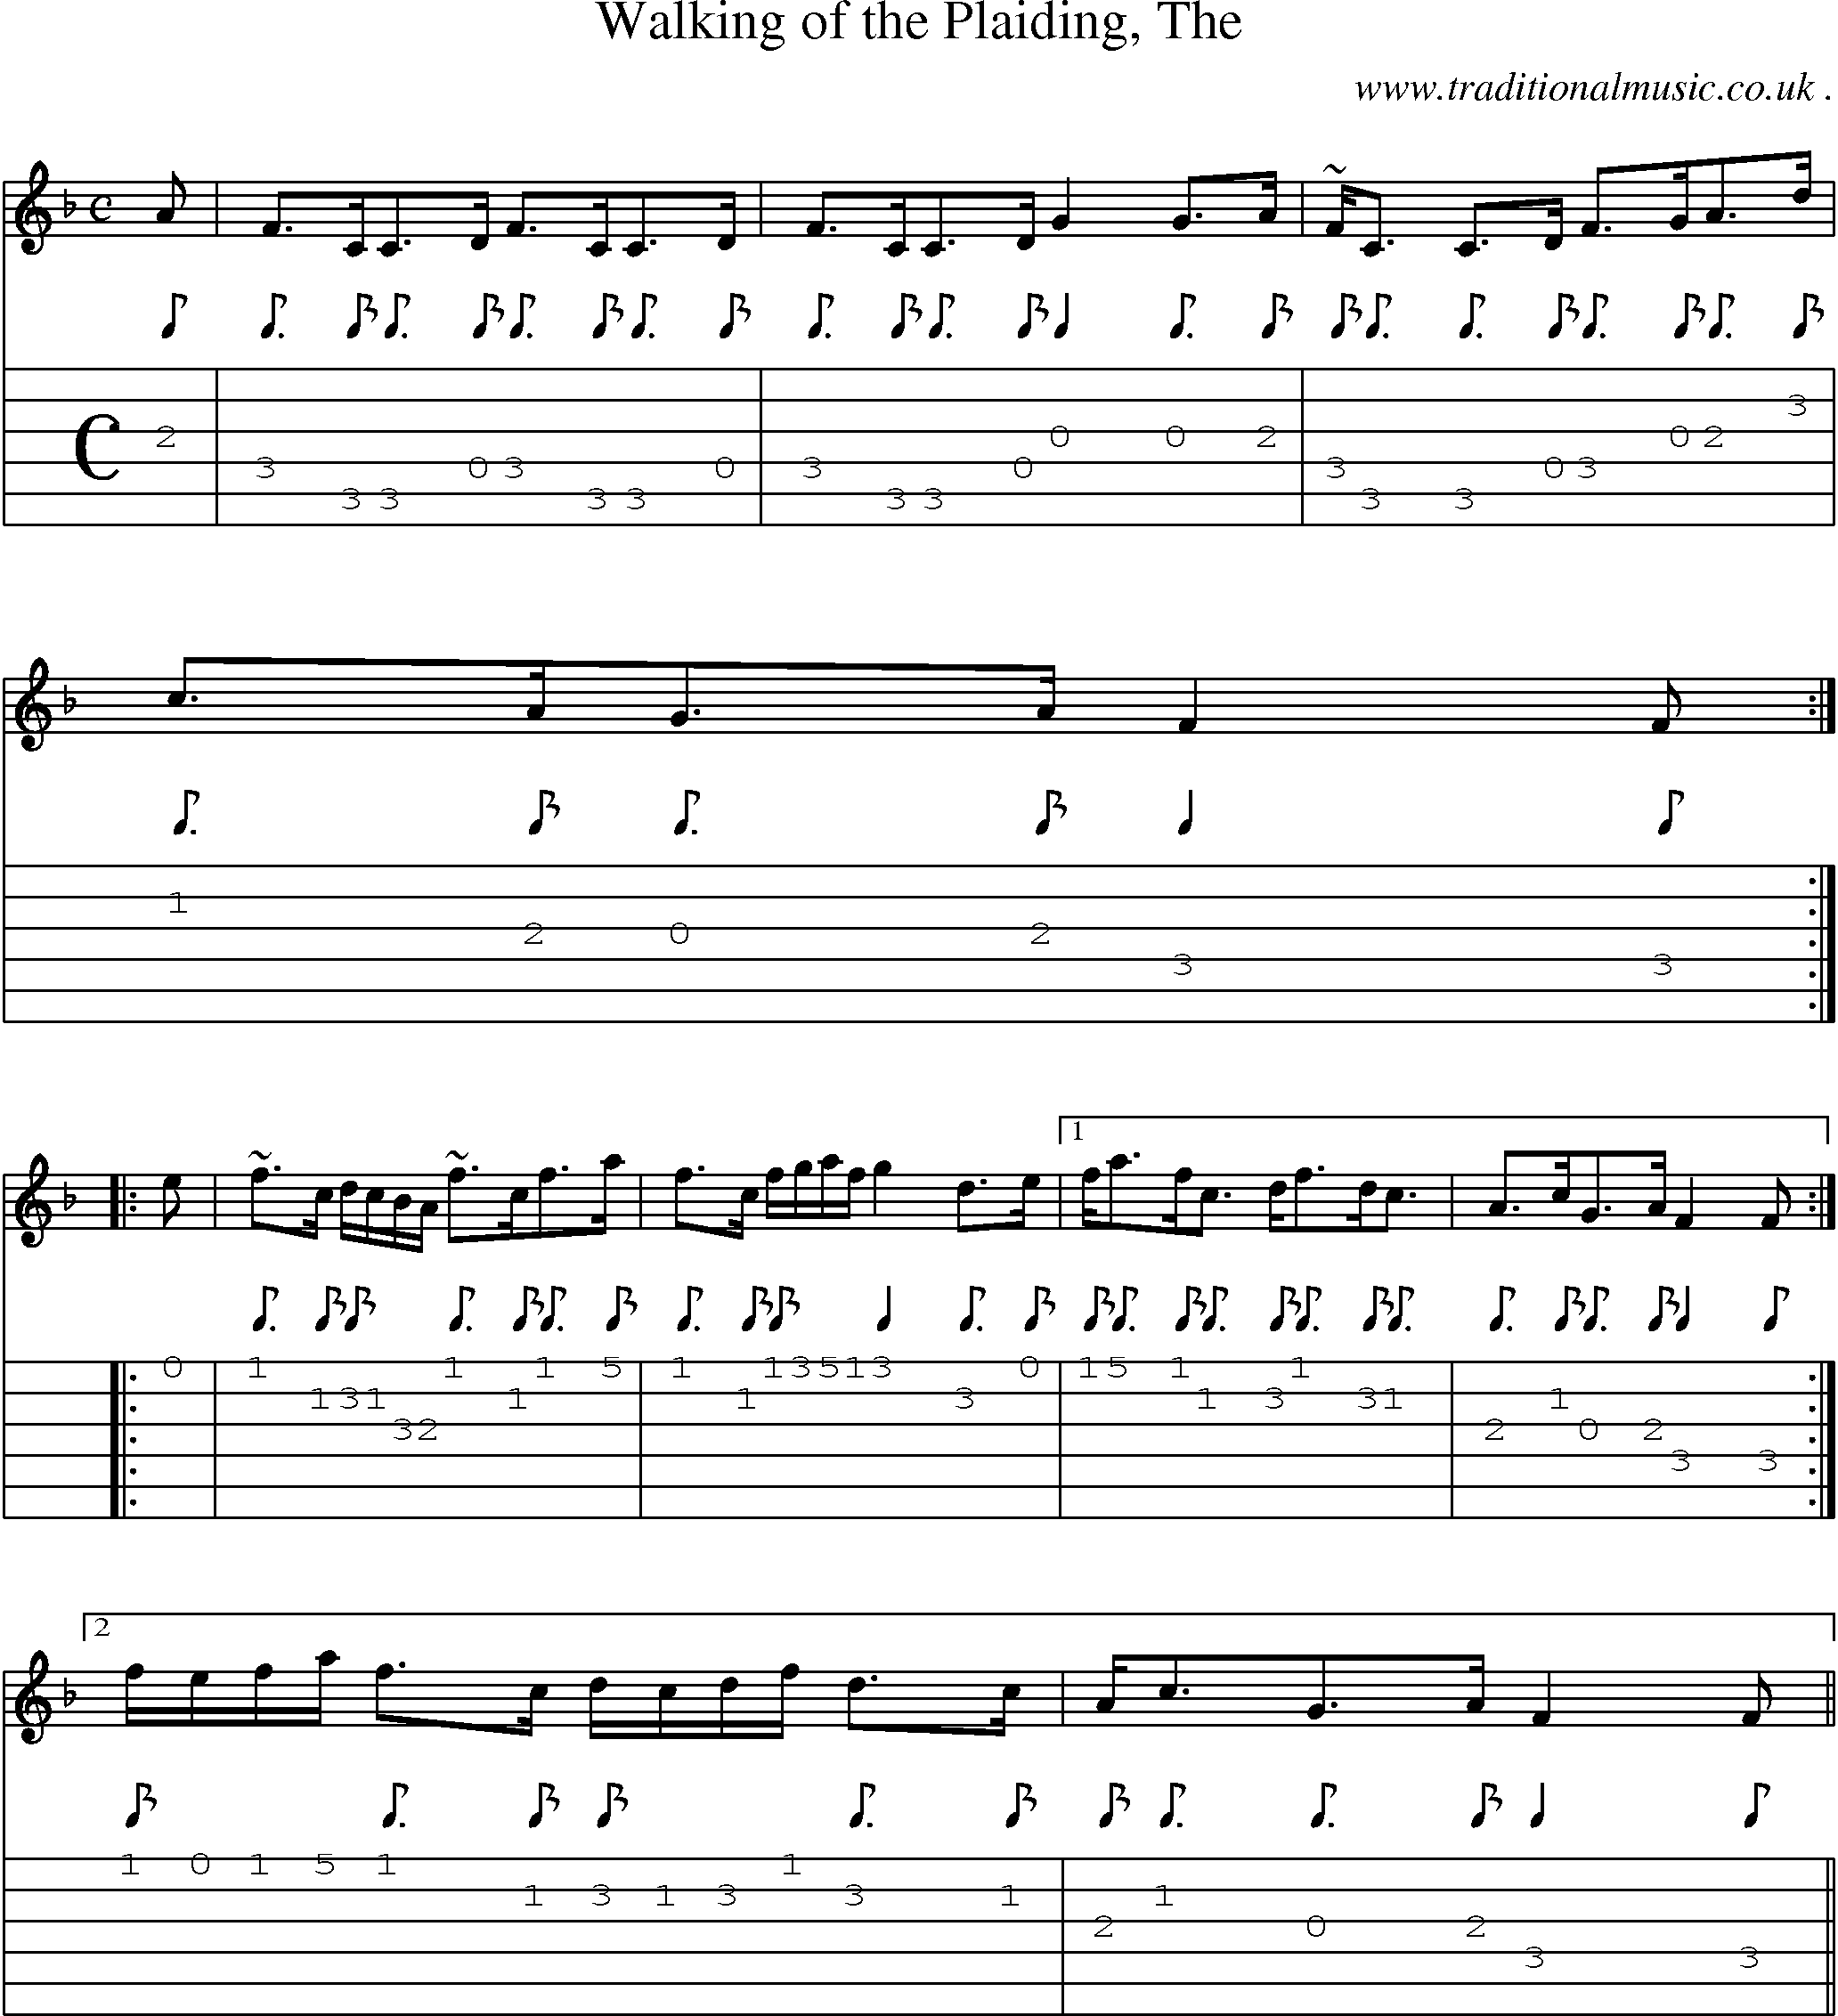 Sheet-music  score, Chords and Guitar Tabs for Walking Of The Plaiding The